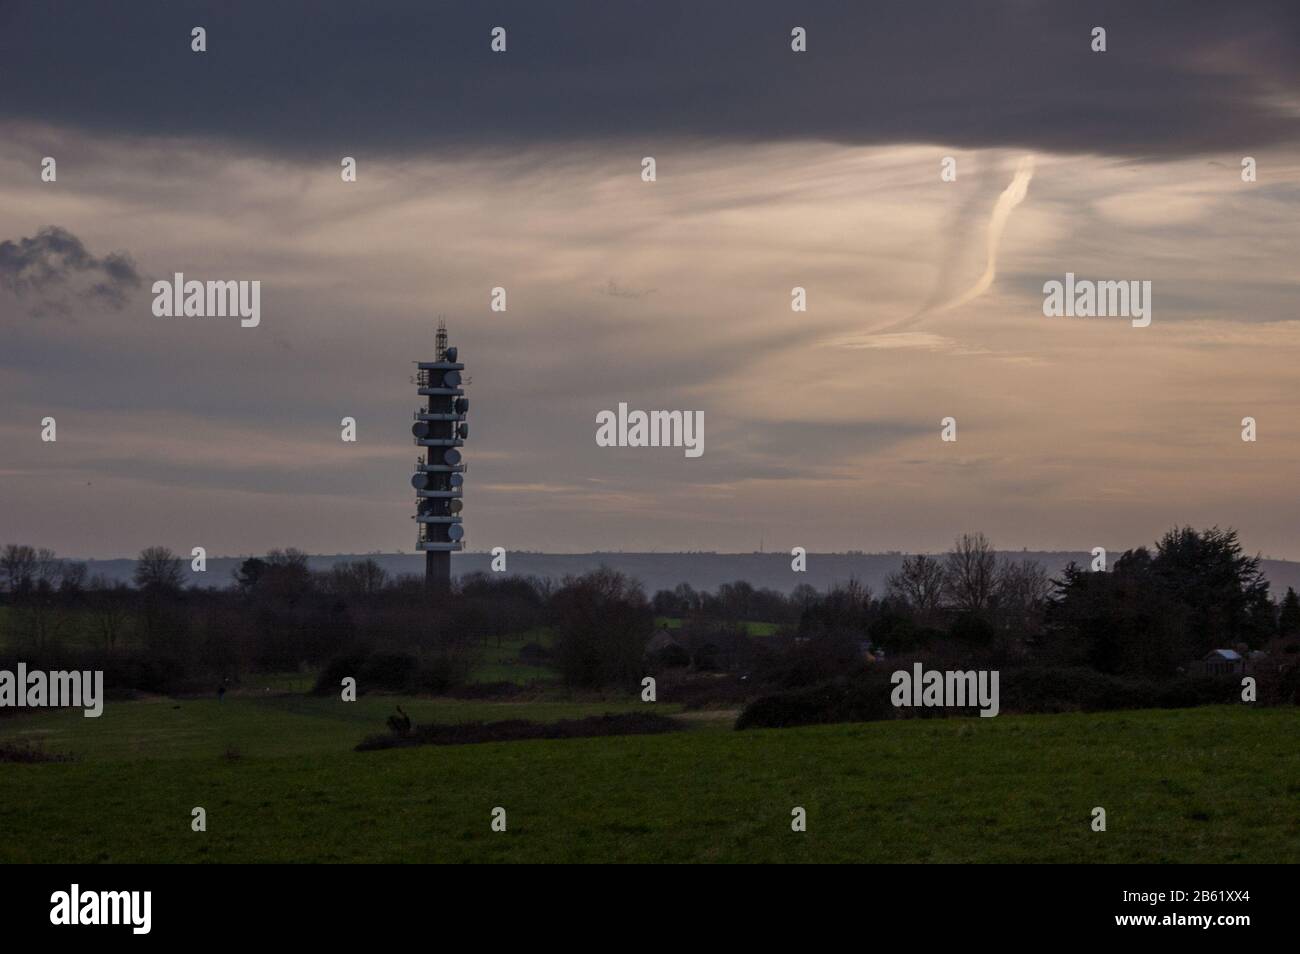 The Purdown BT microwave network transmitter rises from parkland in the Lockleaze neighbourhood of North Bristol. Stock Photo